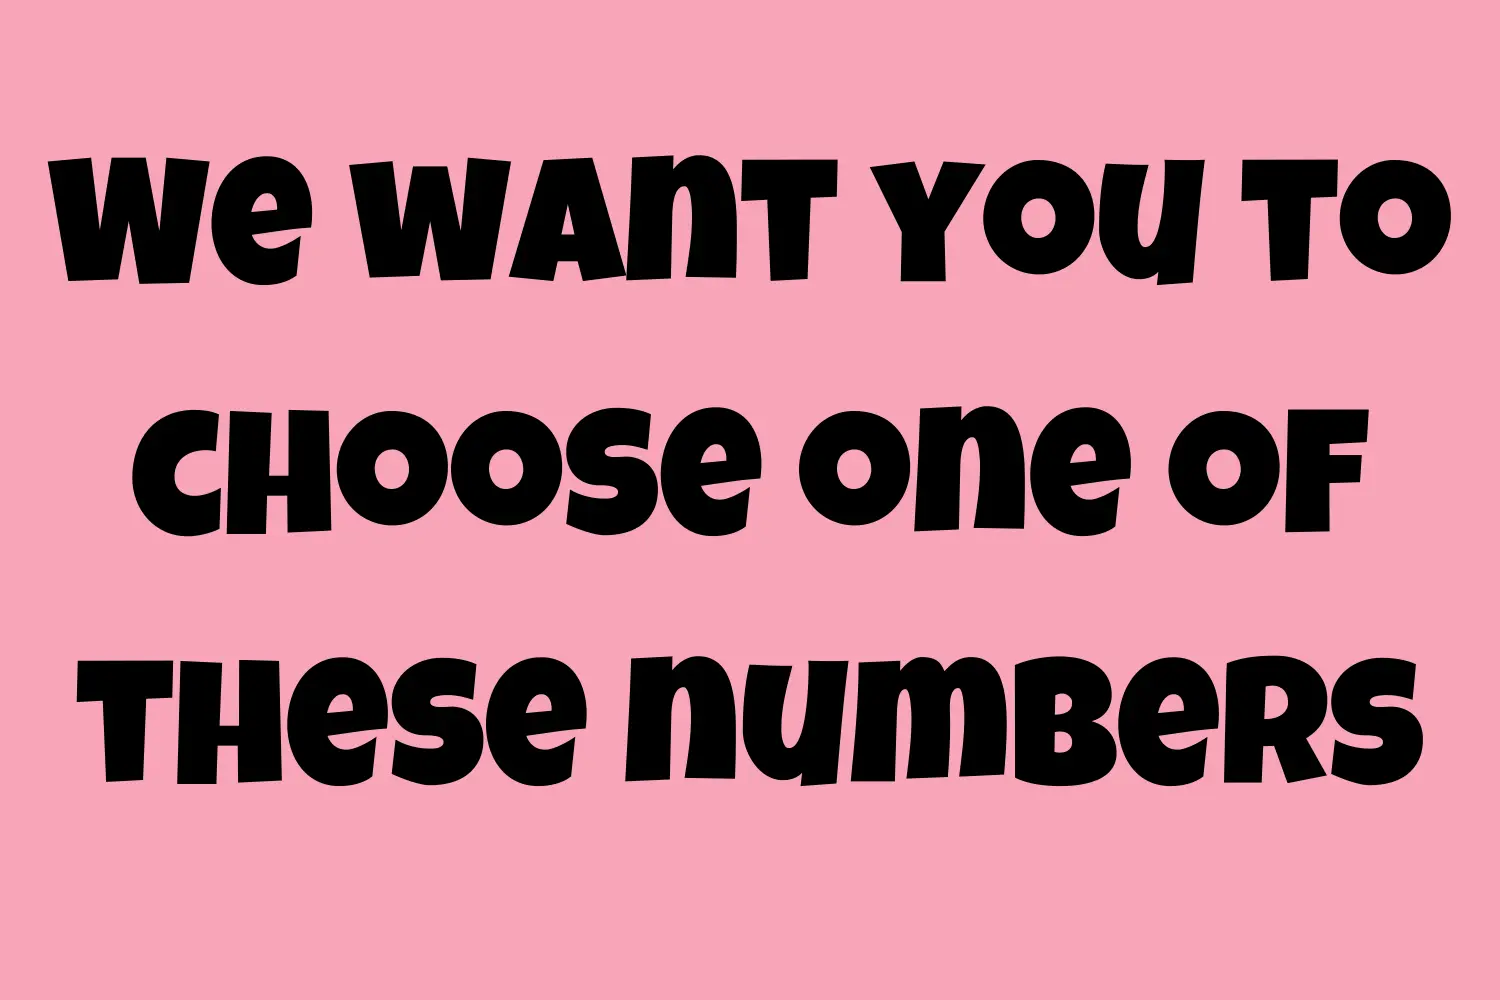 We want you to choose one of these numbers